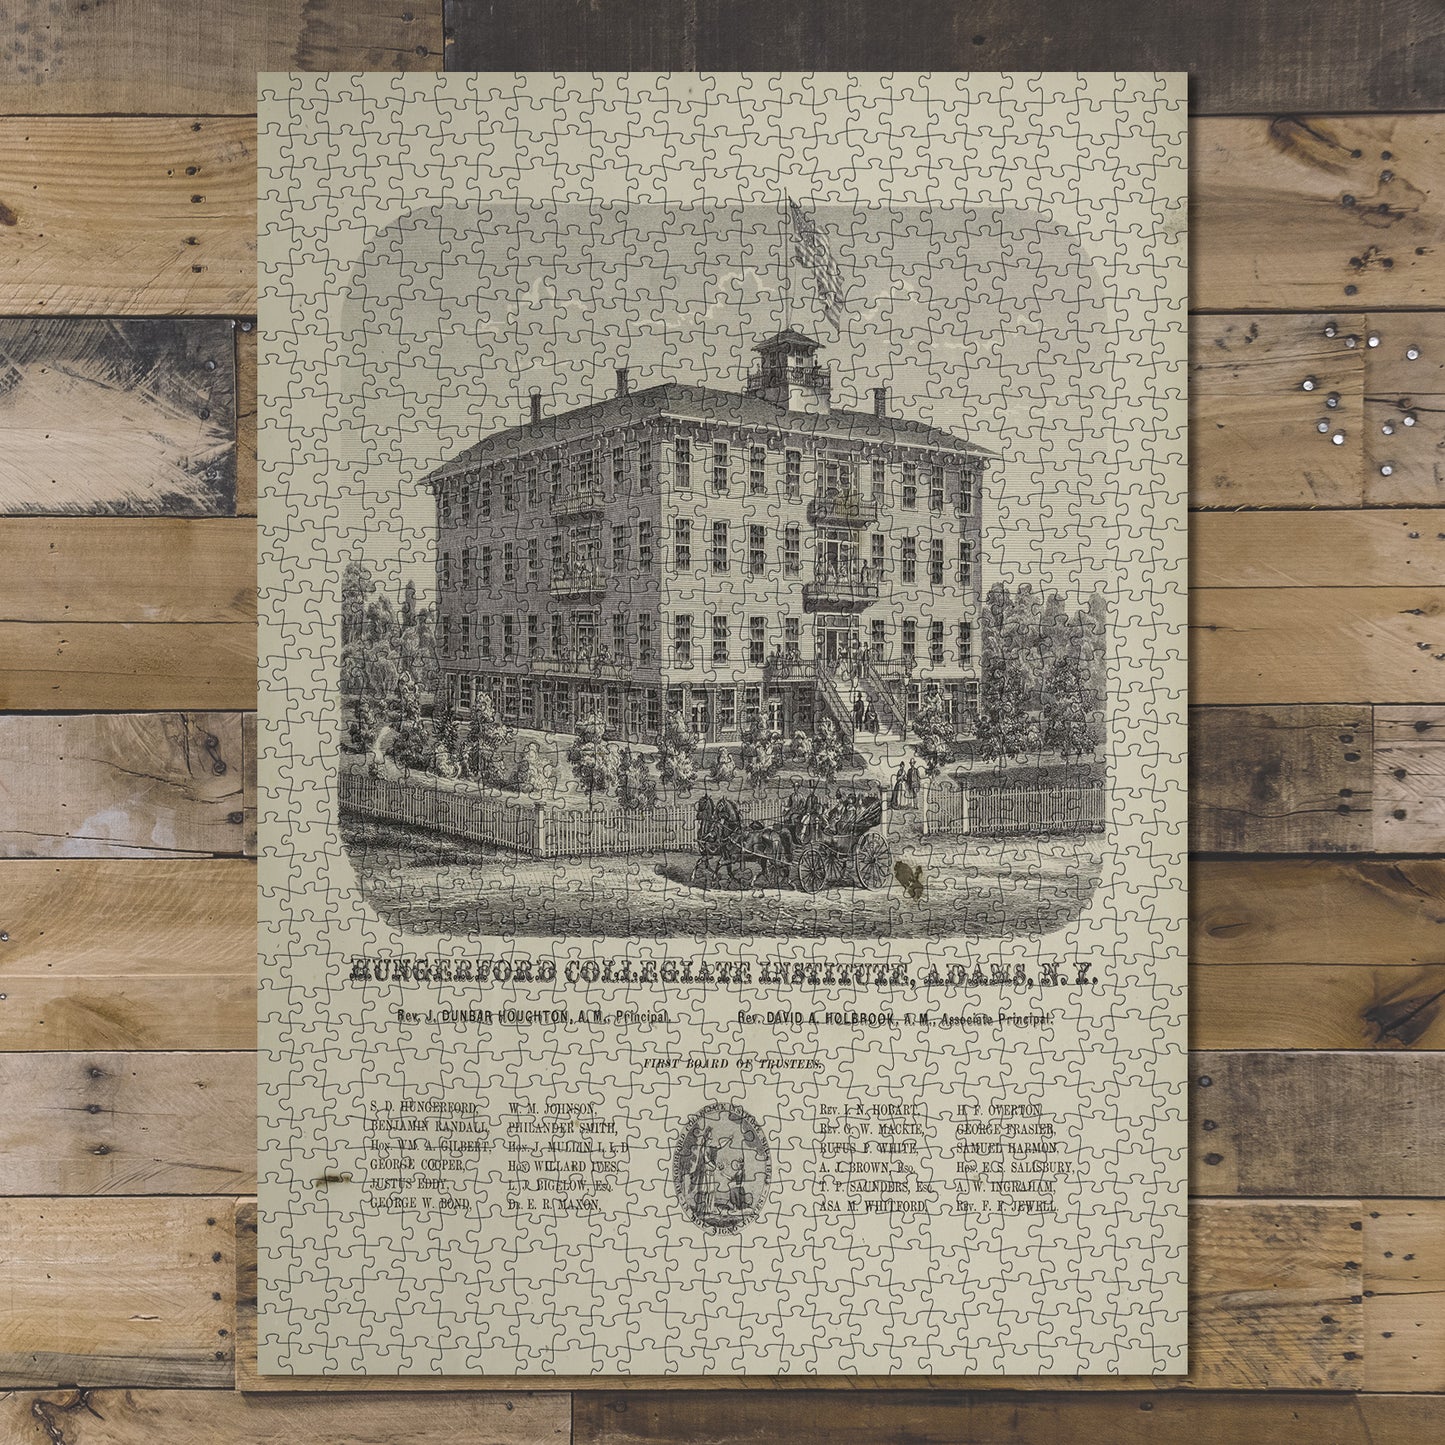 1000 Piece Jigsaw Puzzle 1864 Map of Philadelphia Hungerford Collegiate Institution,